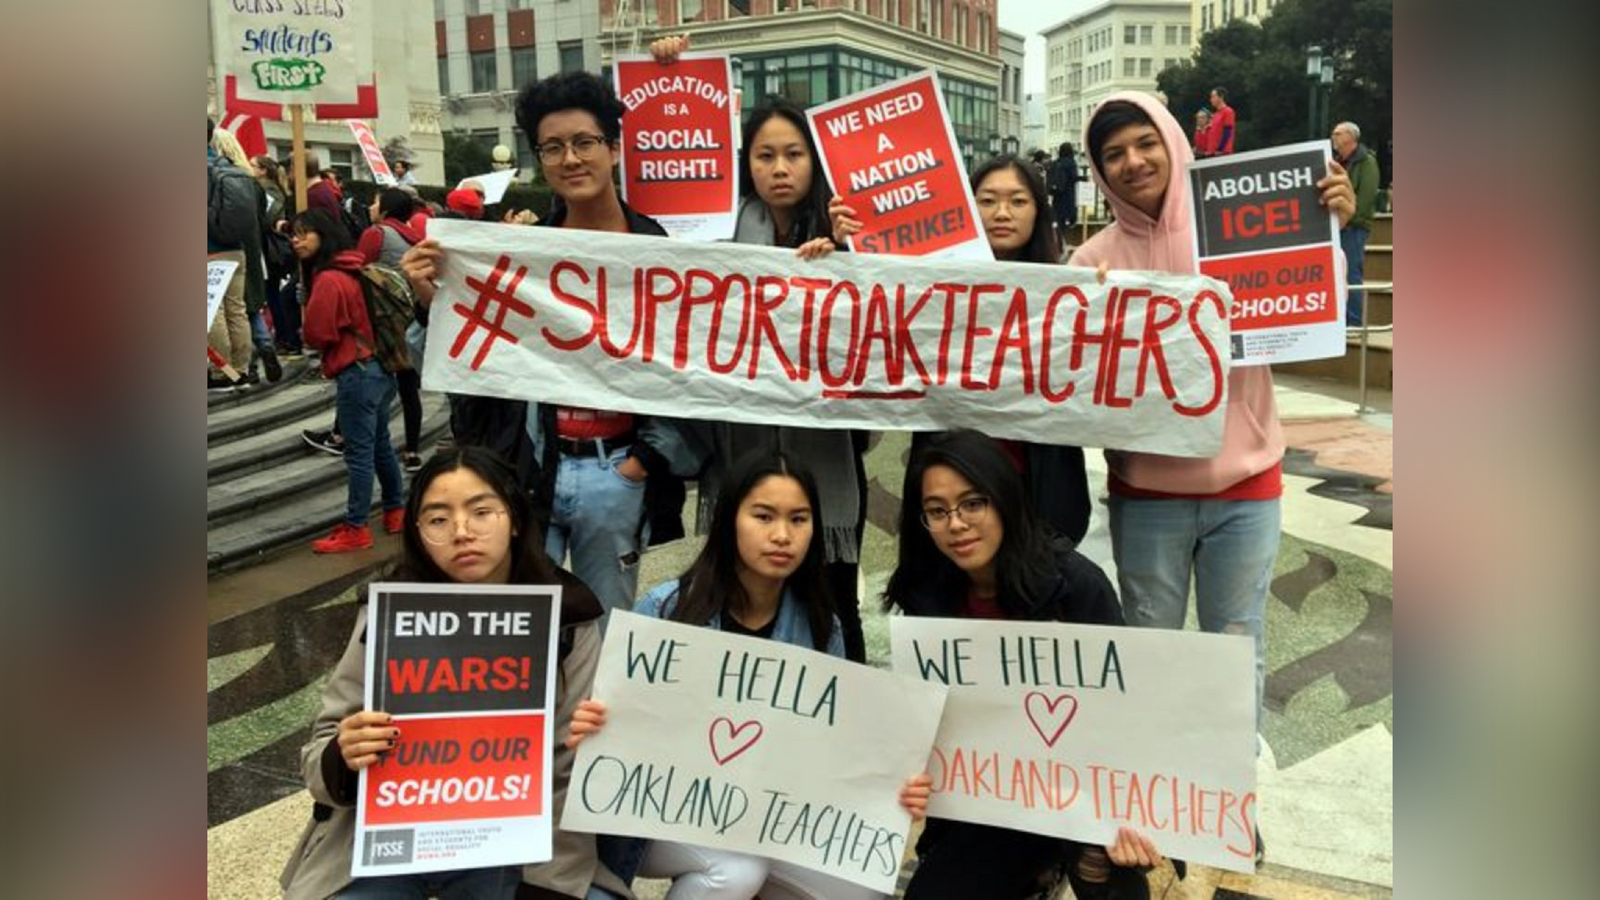  Oakland, California teachers hold wildcat sickout in support of Los Angeles schools strike 